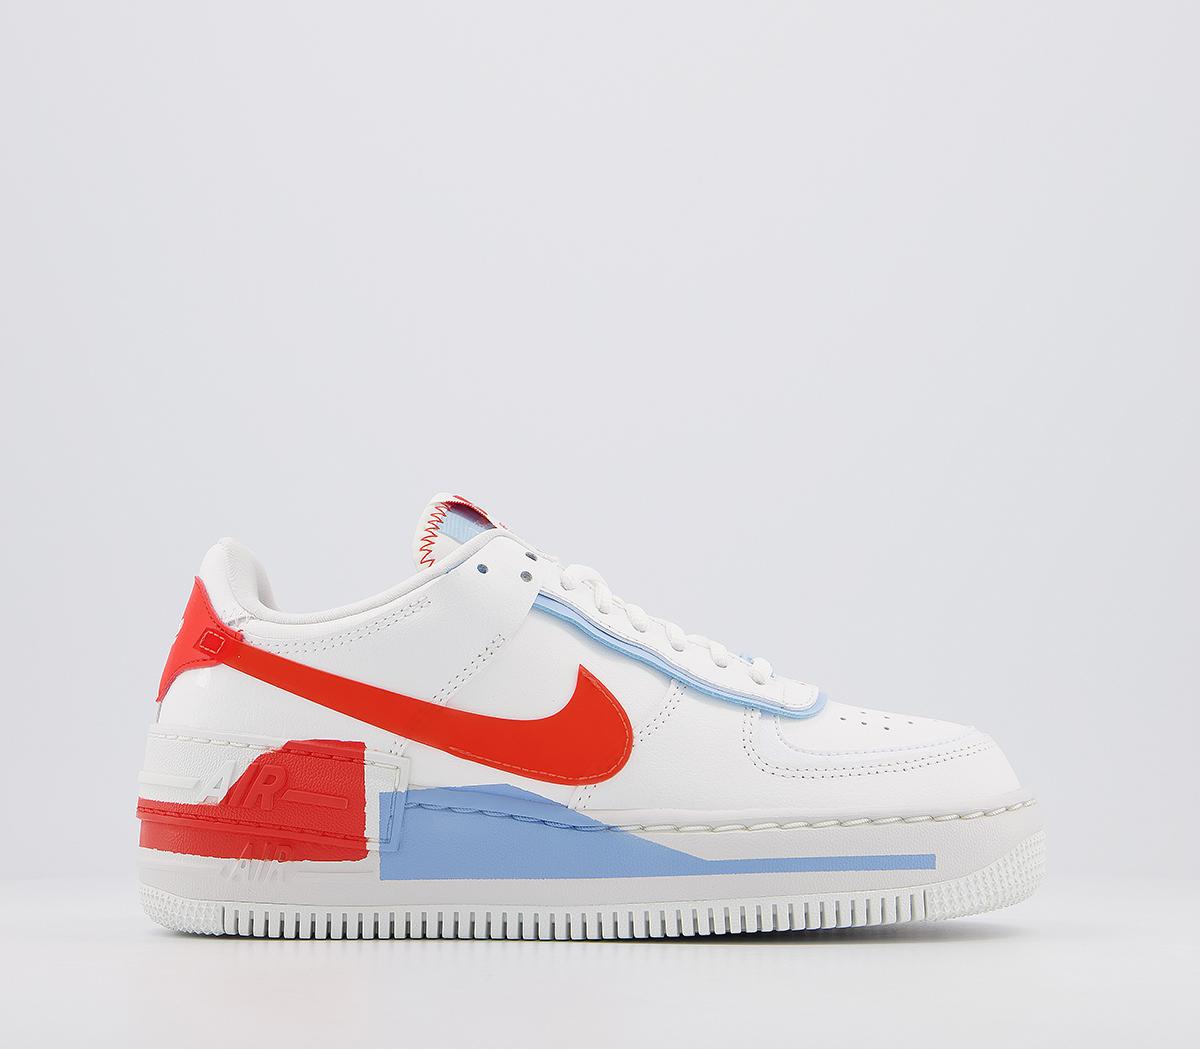 air force 1 blue and orange